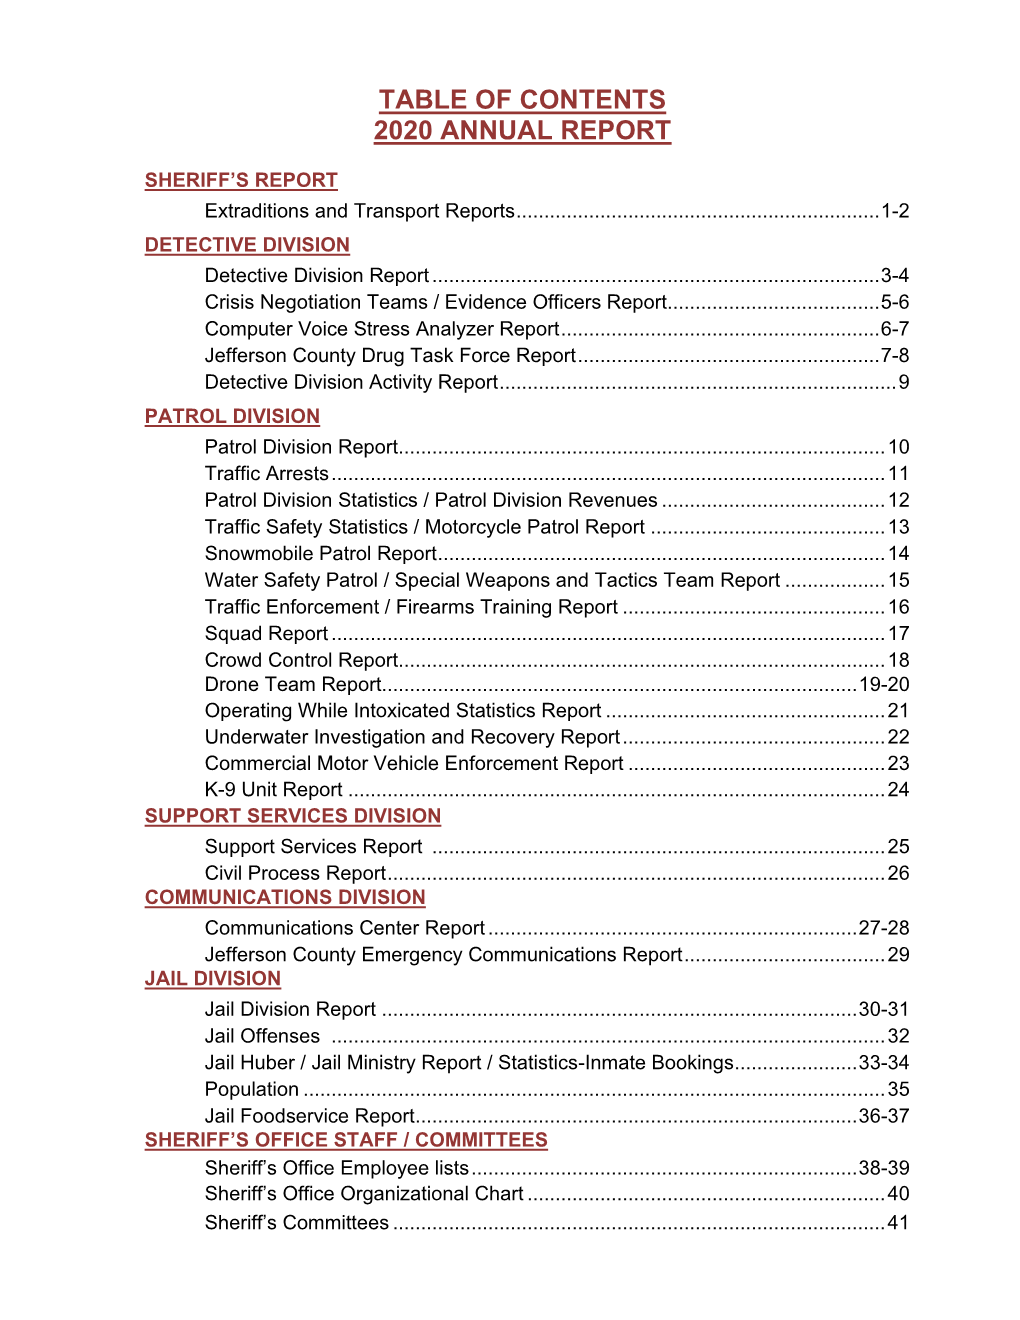 Table of Contents 2020 Annual Report